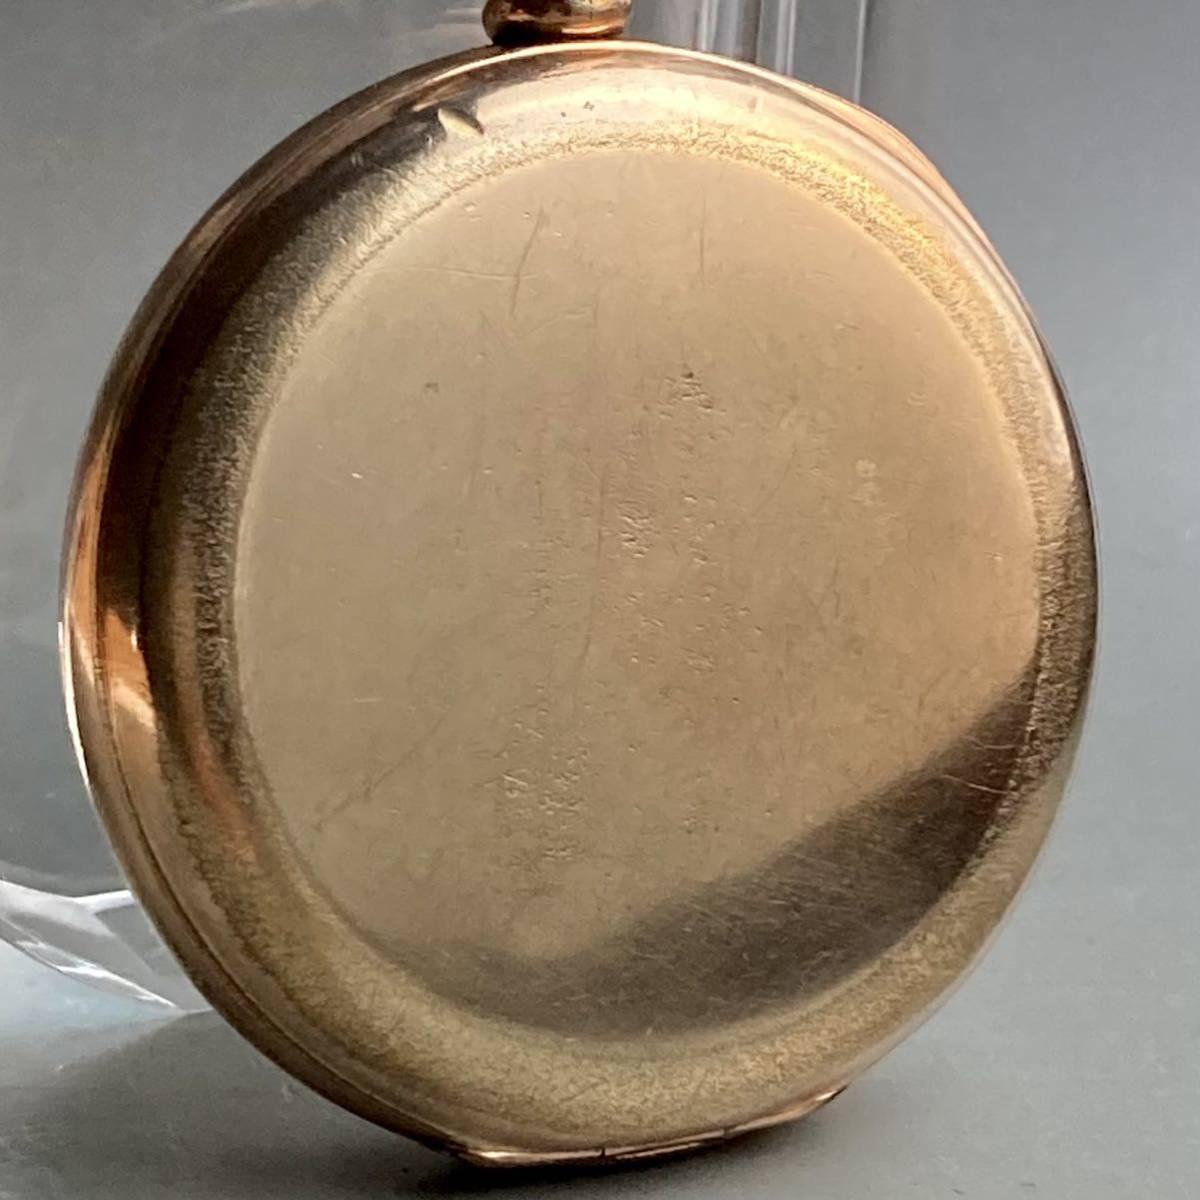 Waltham Pocket Watch Antique Manual Hunter Case Gold 49mm 16s Vintage Watch - Murphy Johnson Watches Co.